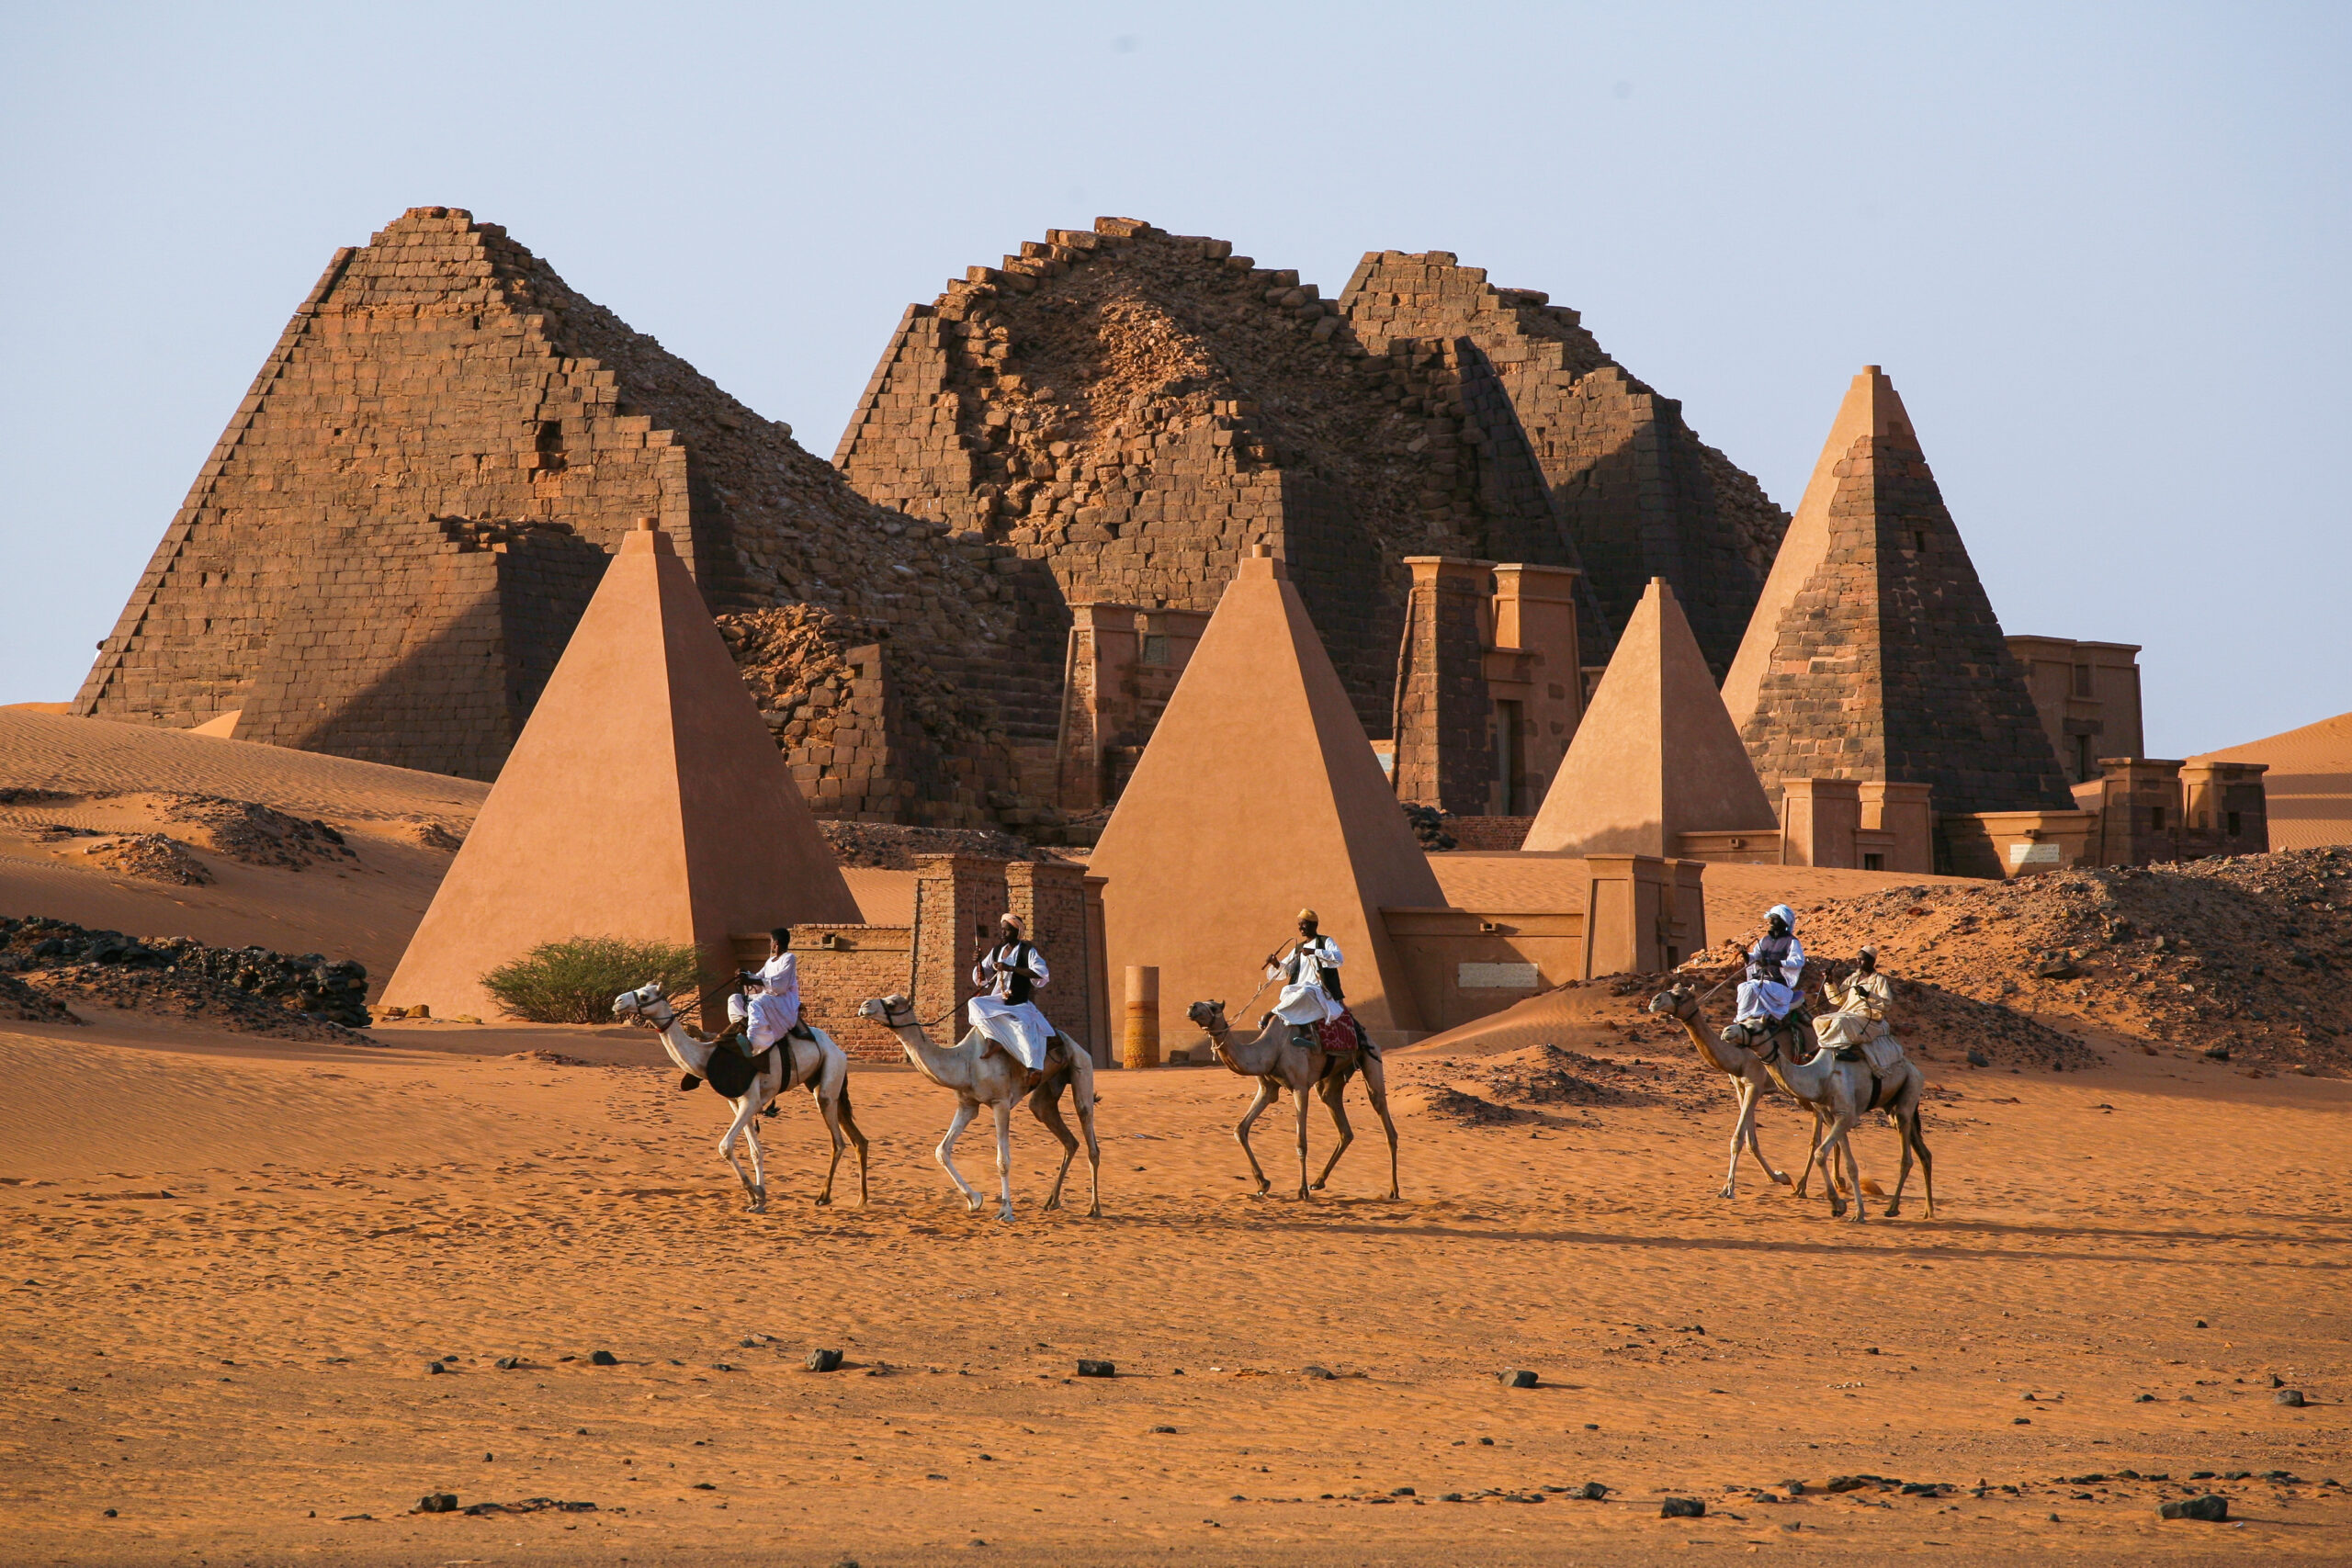 Have you ever heard of the Nubian Pyramids? This is a side of Arab culture that you haven’t seen. Click for the latest ancient structures.